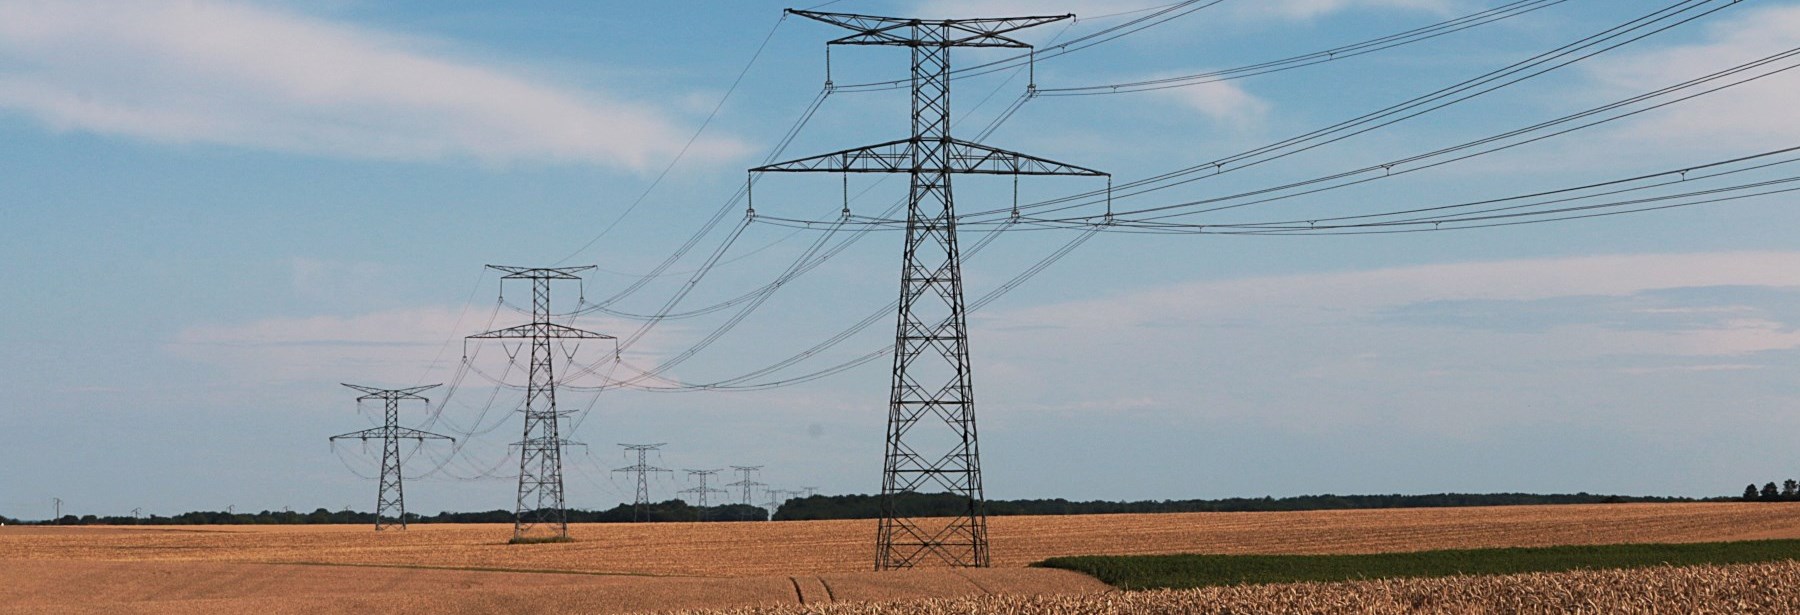 hydro towers in a field against a blue sky